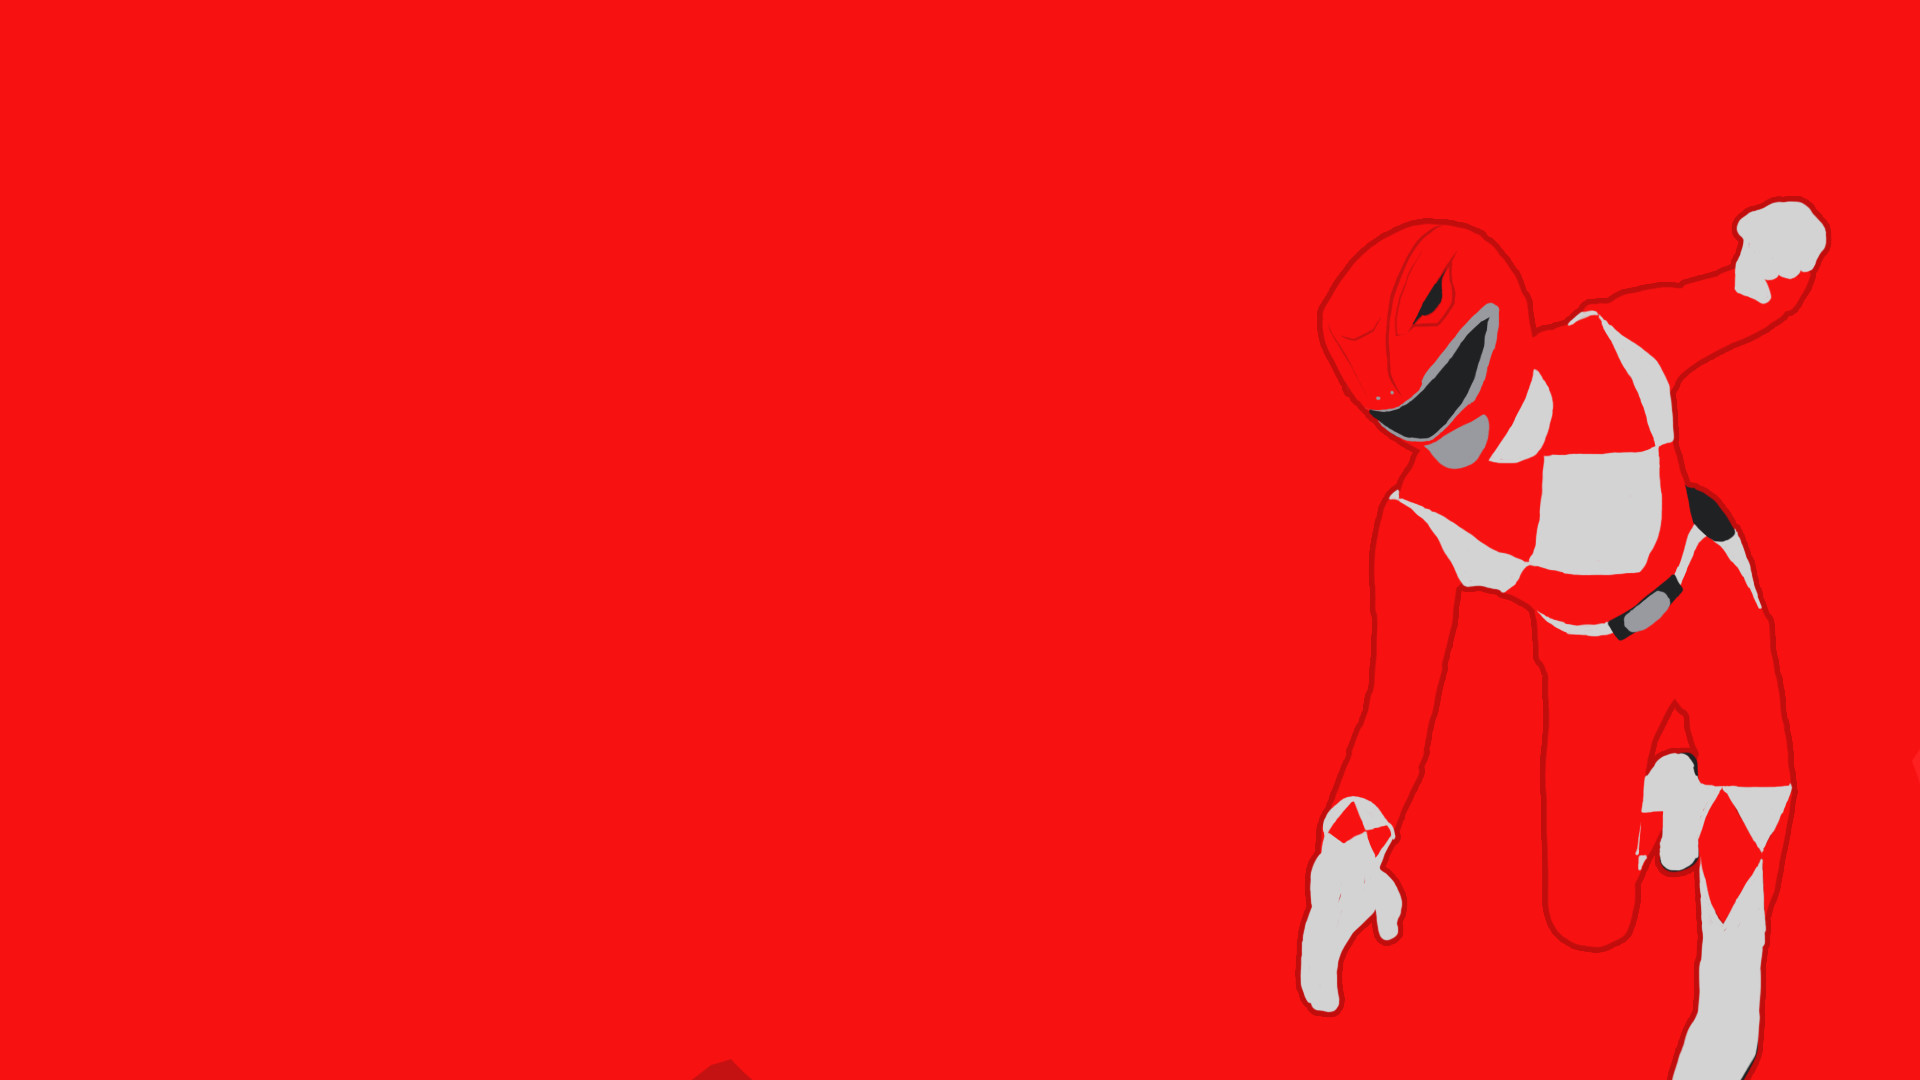 1920x1080 ... Red Ranger - Mighty Morphin Power Rangers by travp333